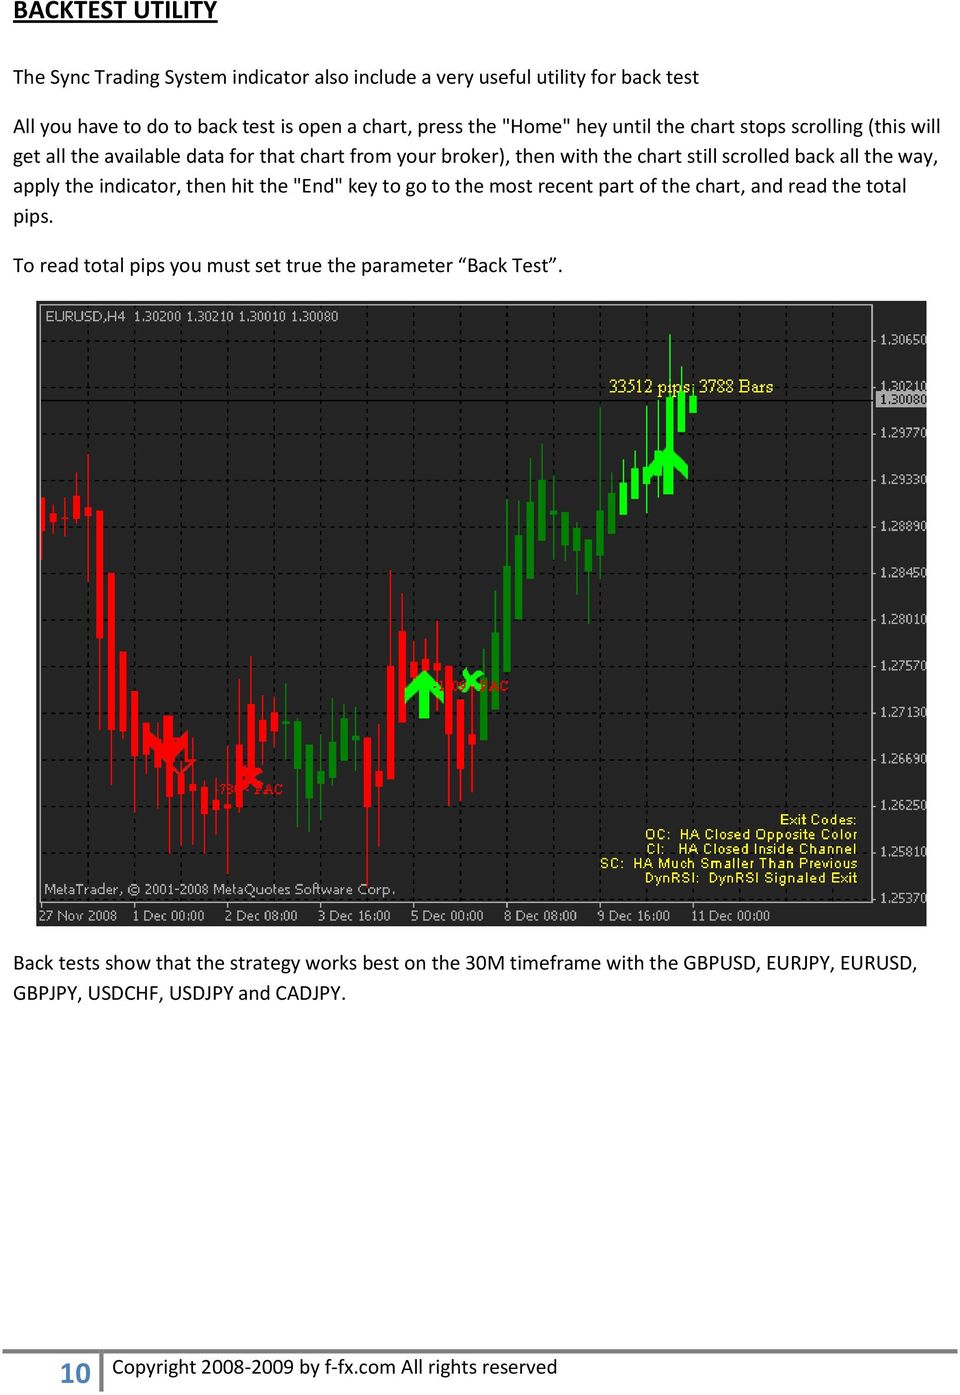 the way, apply the indicator, then hit the "End" key to go to the most recent part of the chart, and read the total pips.